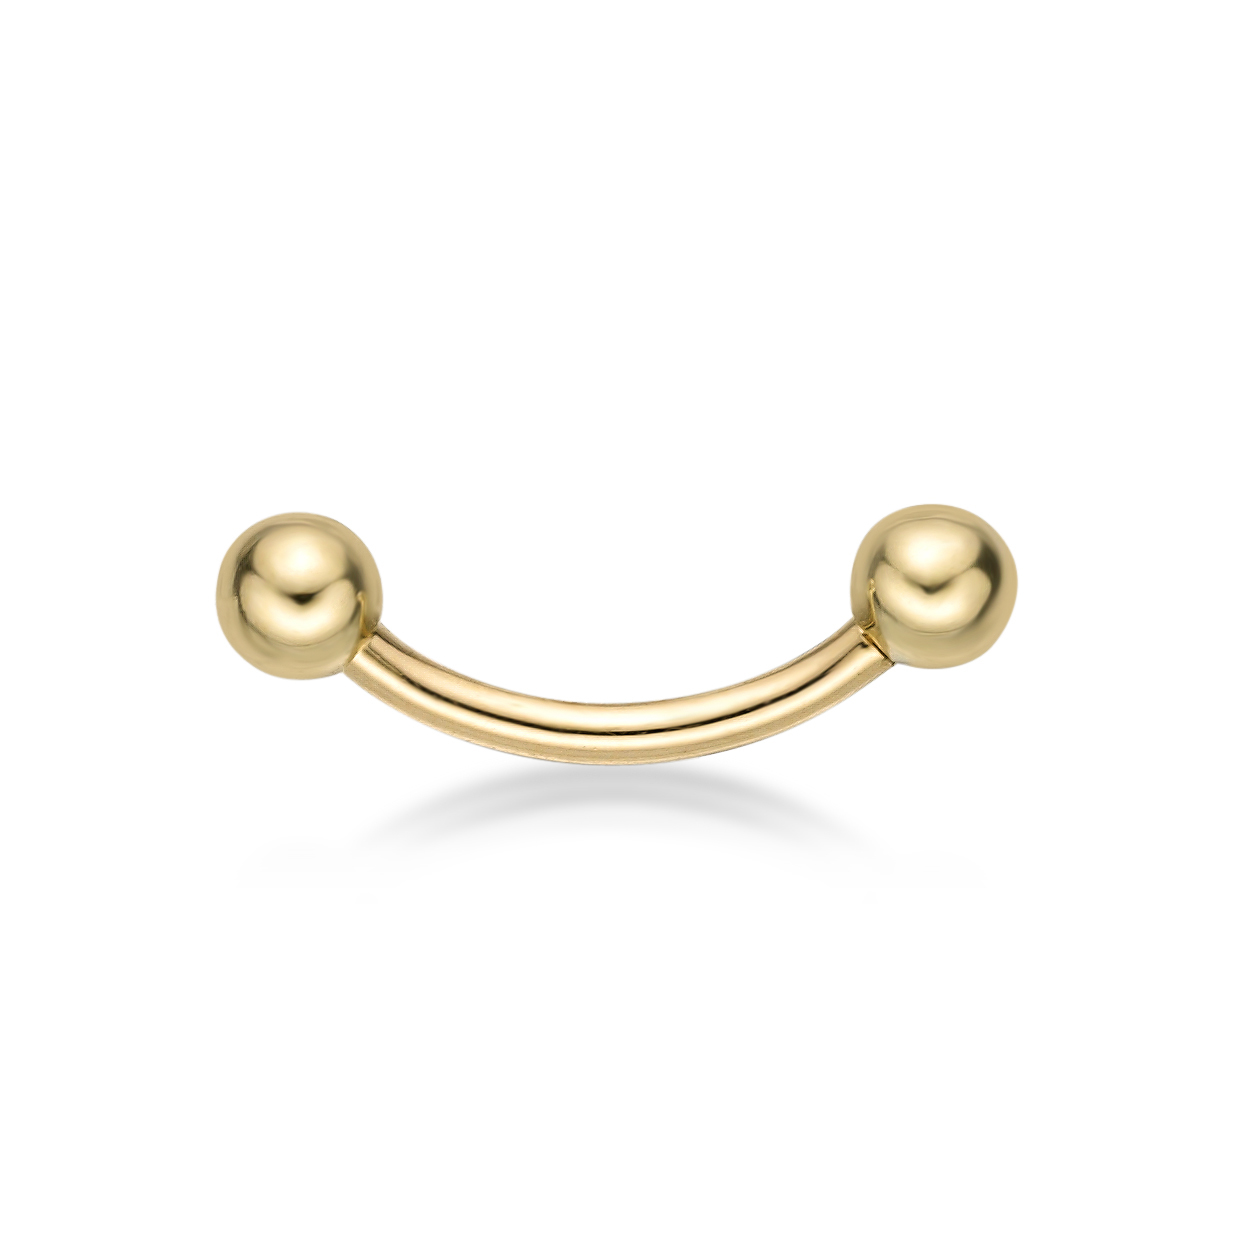 Lavari Jewelers Women's Curved Barbell Eyebrow Ring, 14K Yellow Gold, 5/16 Inch, 16 Gauge